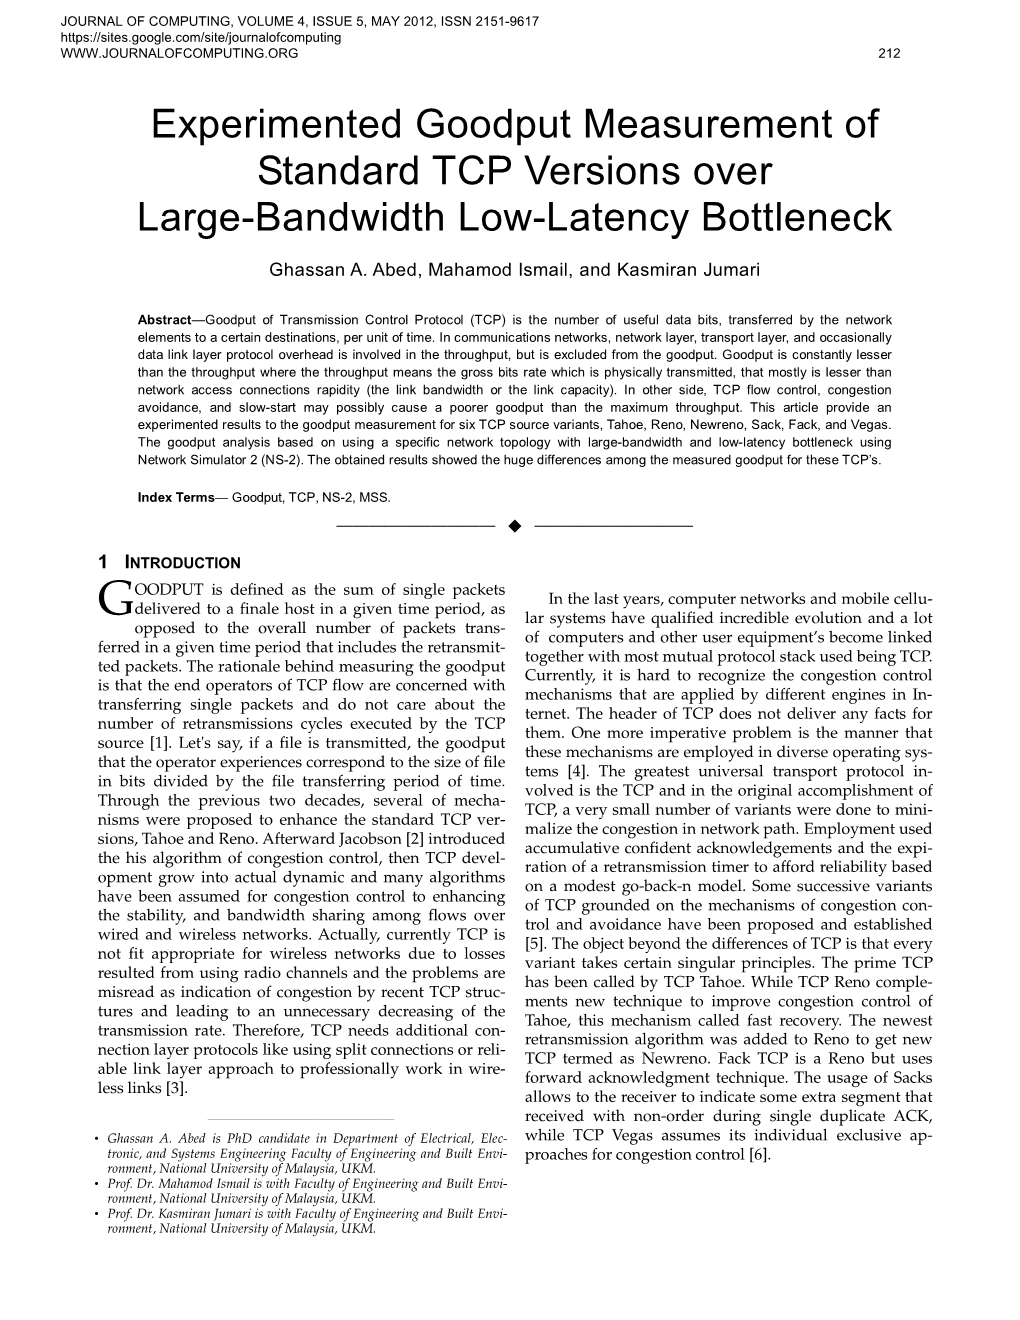 Experimented Goodput Measurement of Standard TCP Versions Over Large-Bandwidth Low-Latency Bottleneck